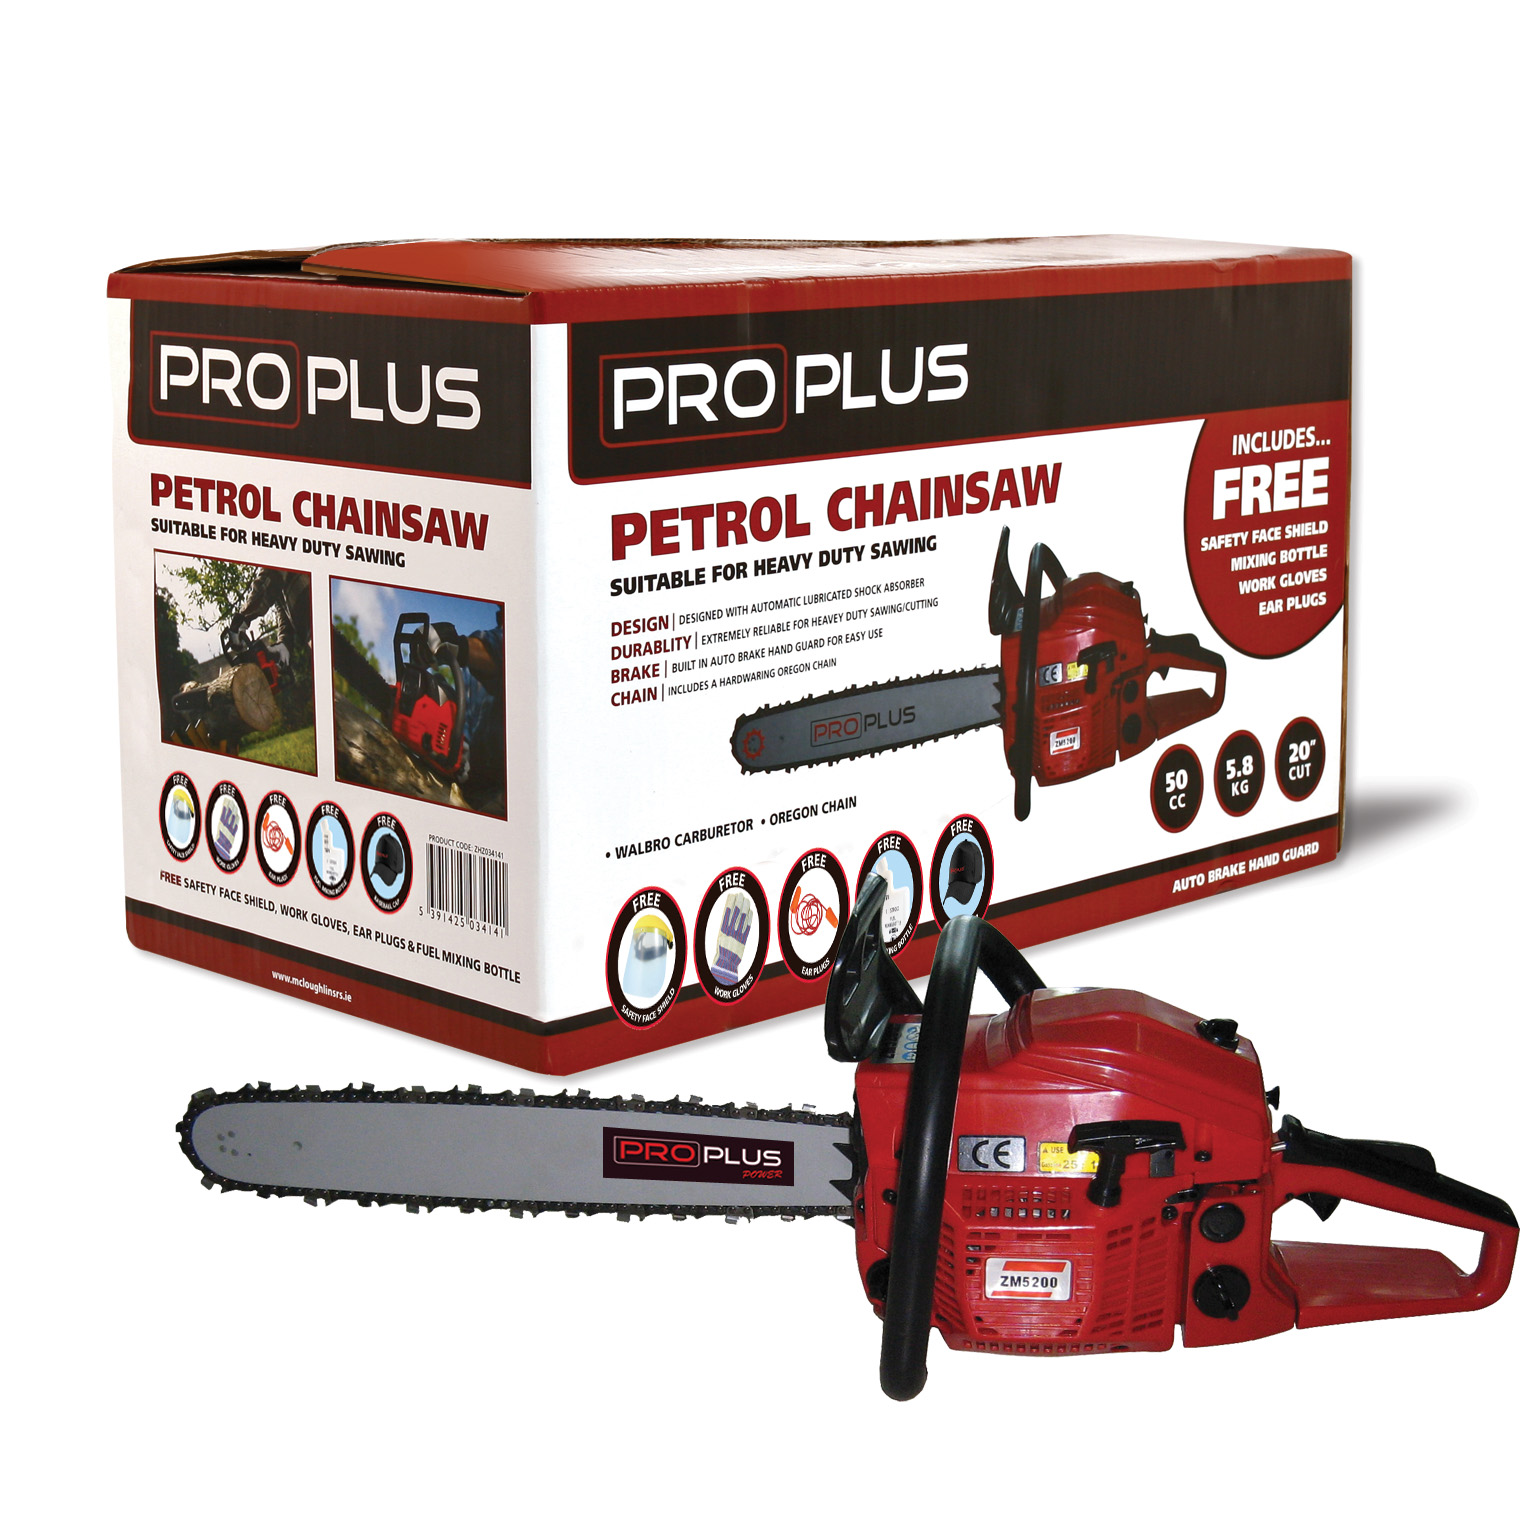 ProPlus Chain Saw 50cc, 20in Bar, Oregon Chain, Free kit includes safety face shield, ear plugs, work gloves and fuel mixing bottle